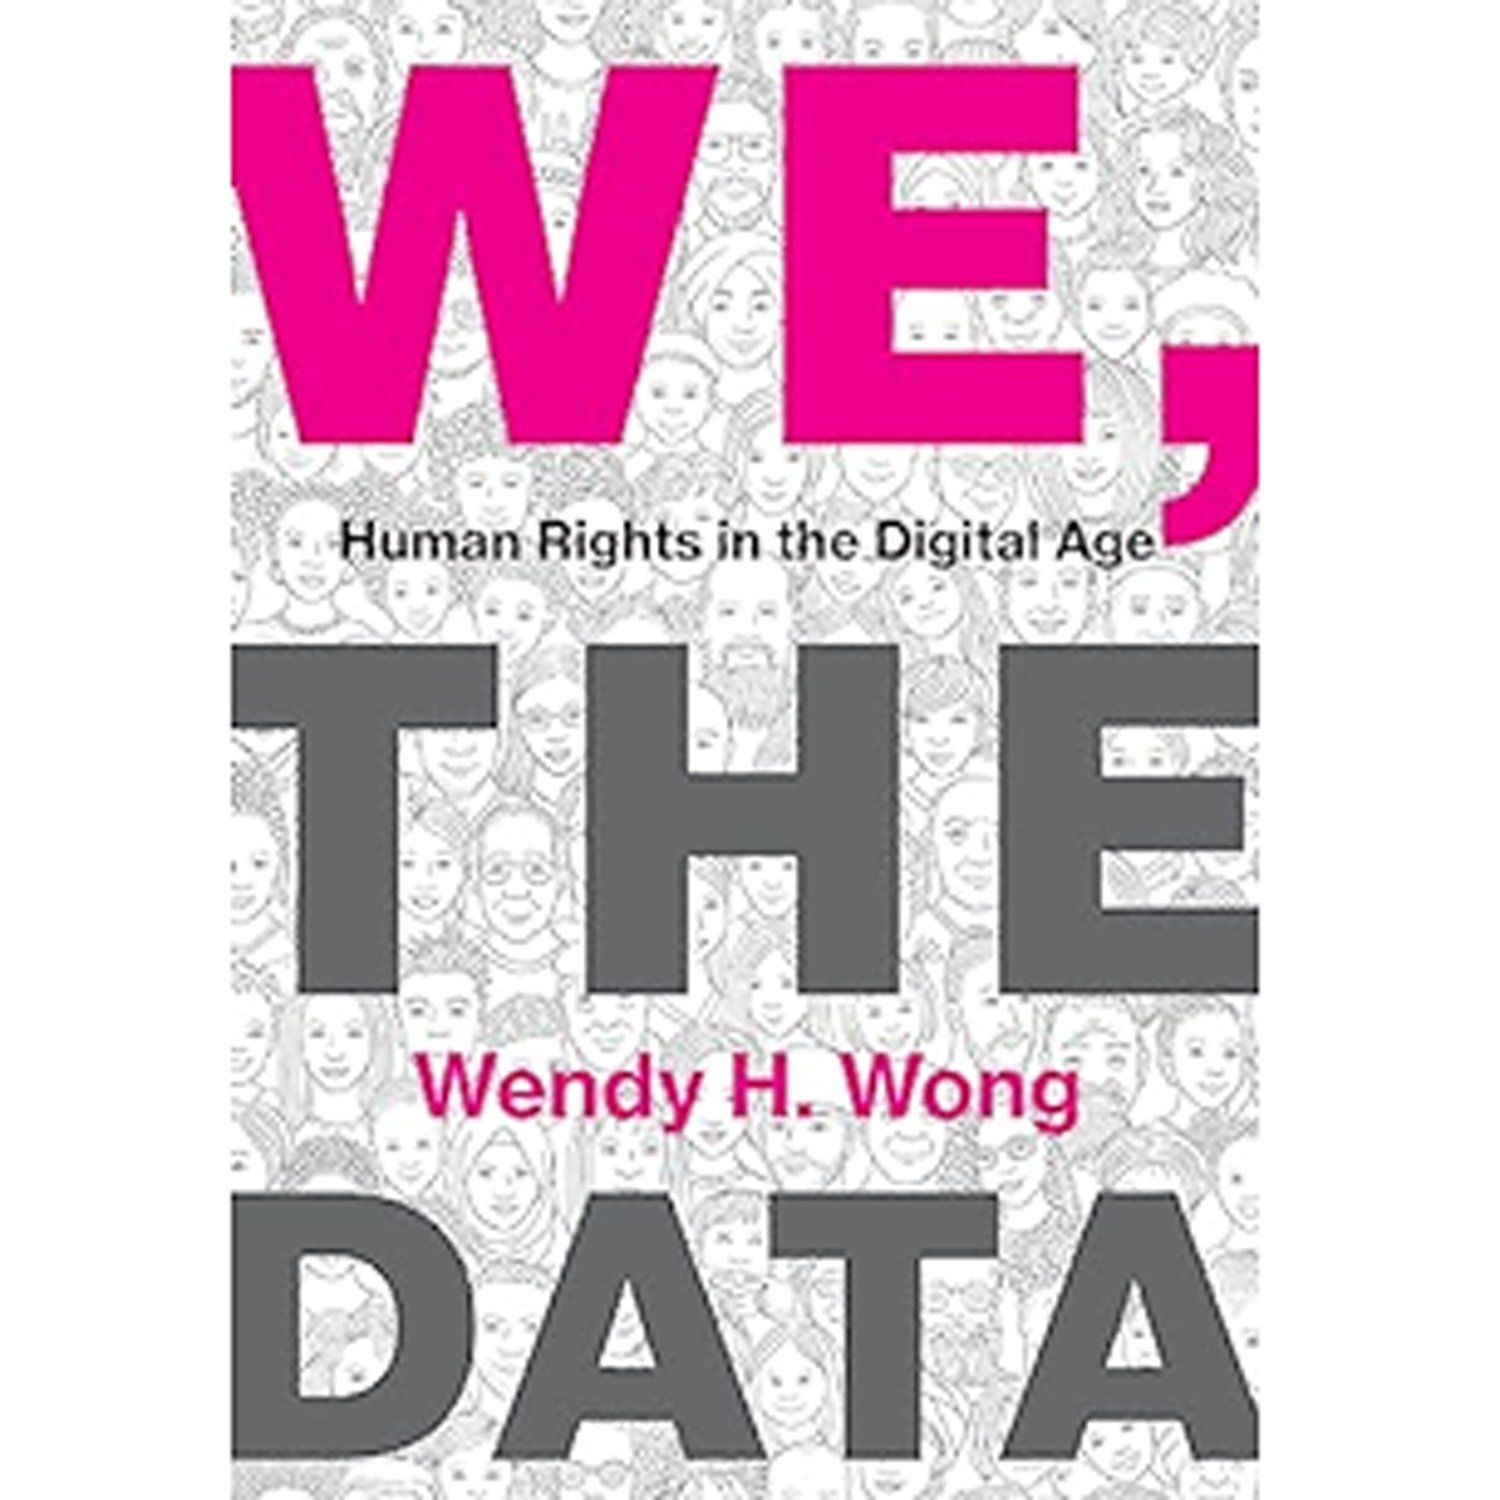 Does privacy exist anymore? Or are humans just sets of data to be traded and sold? - Highlights - WENDY WONG